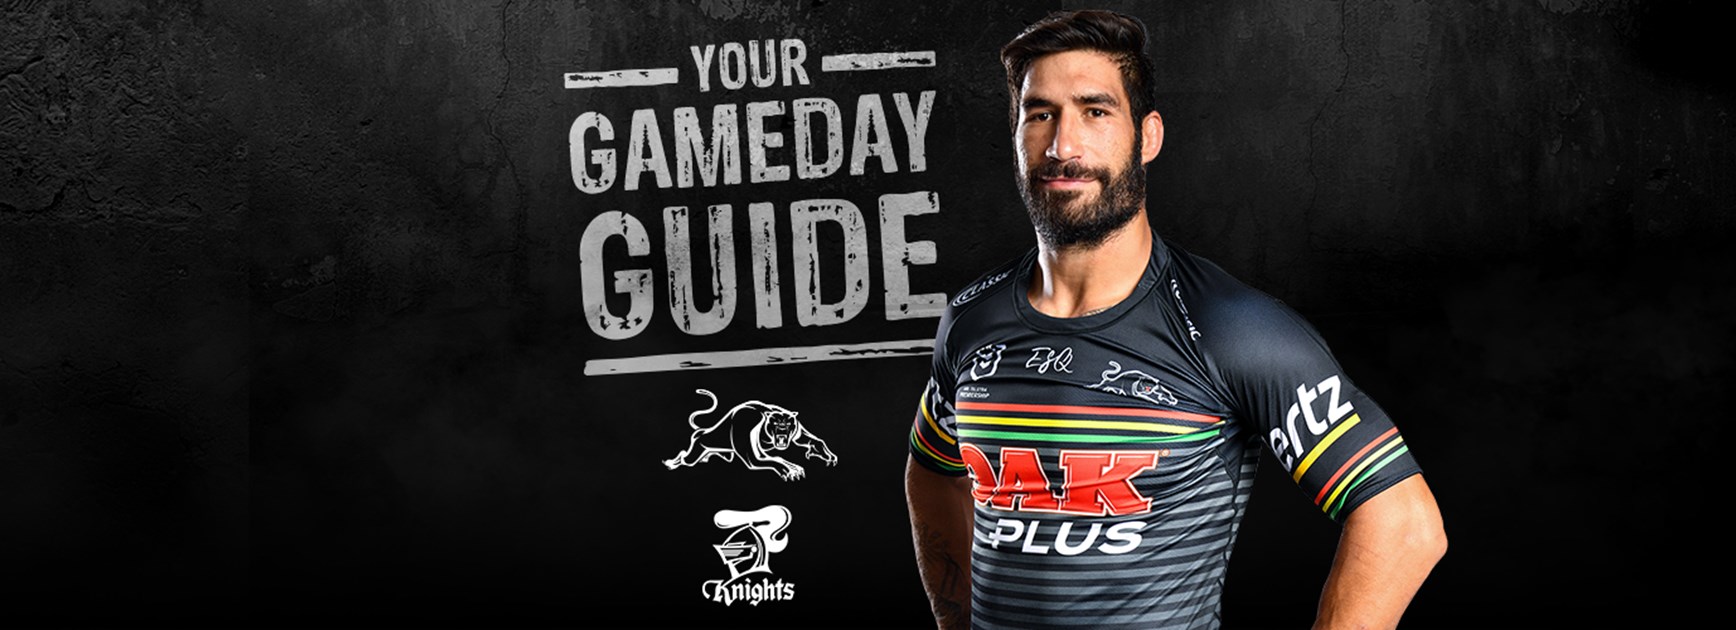 Gameday Guide: Old Boys Day